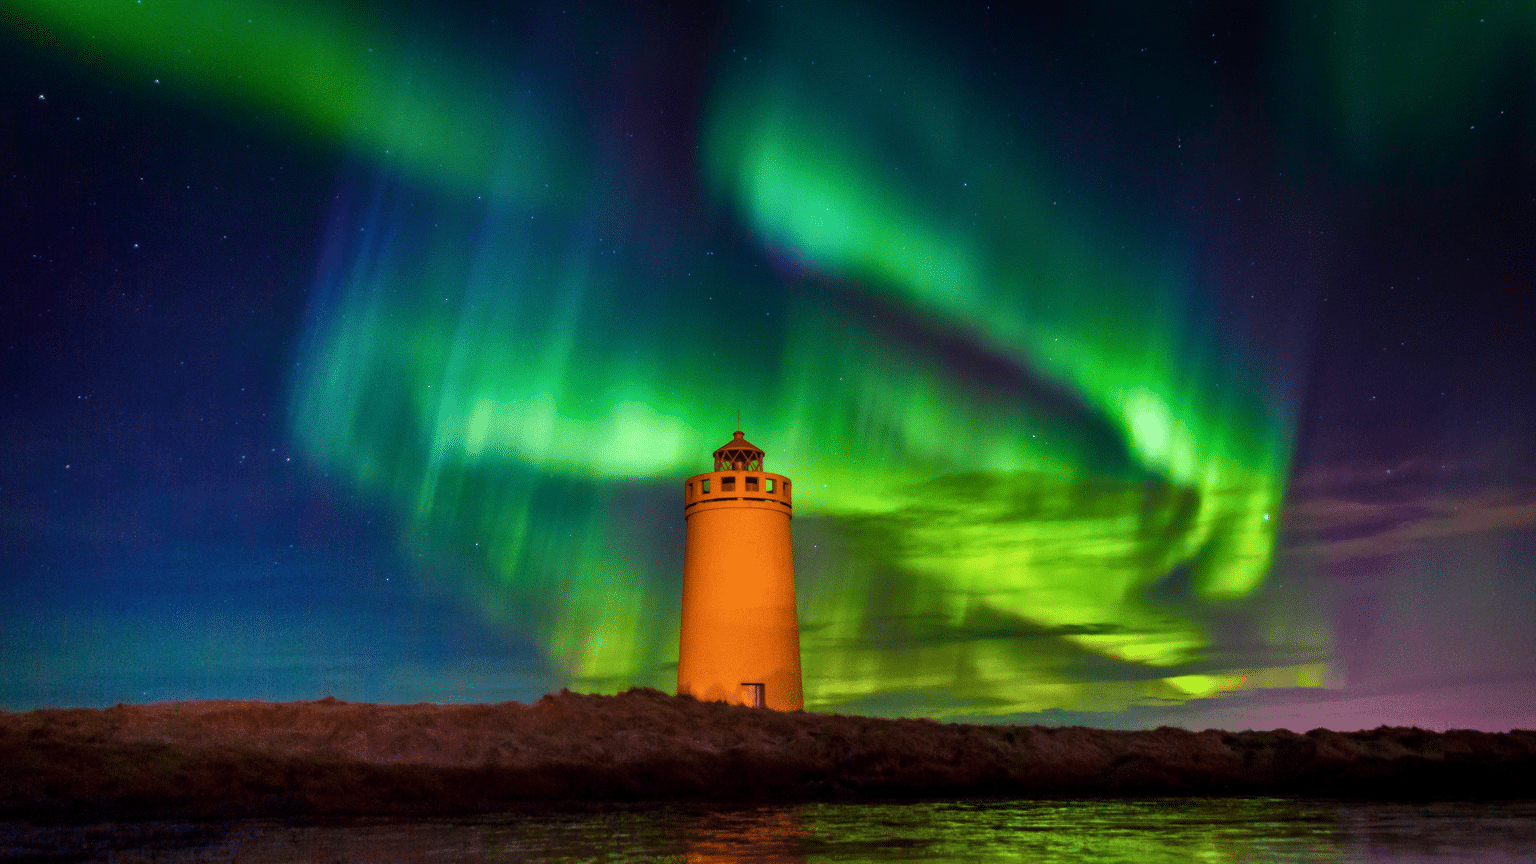 A lighthouse in Iceland under the Northern Lights.